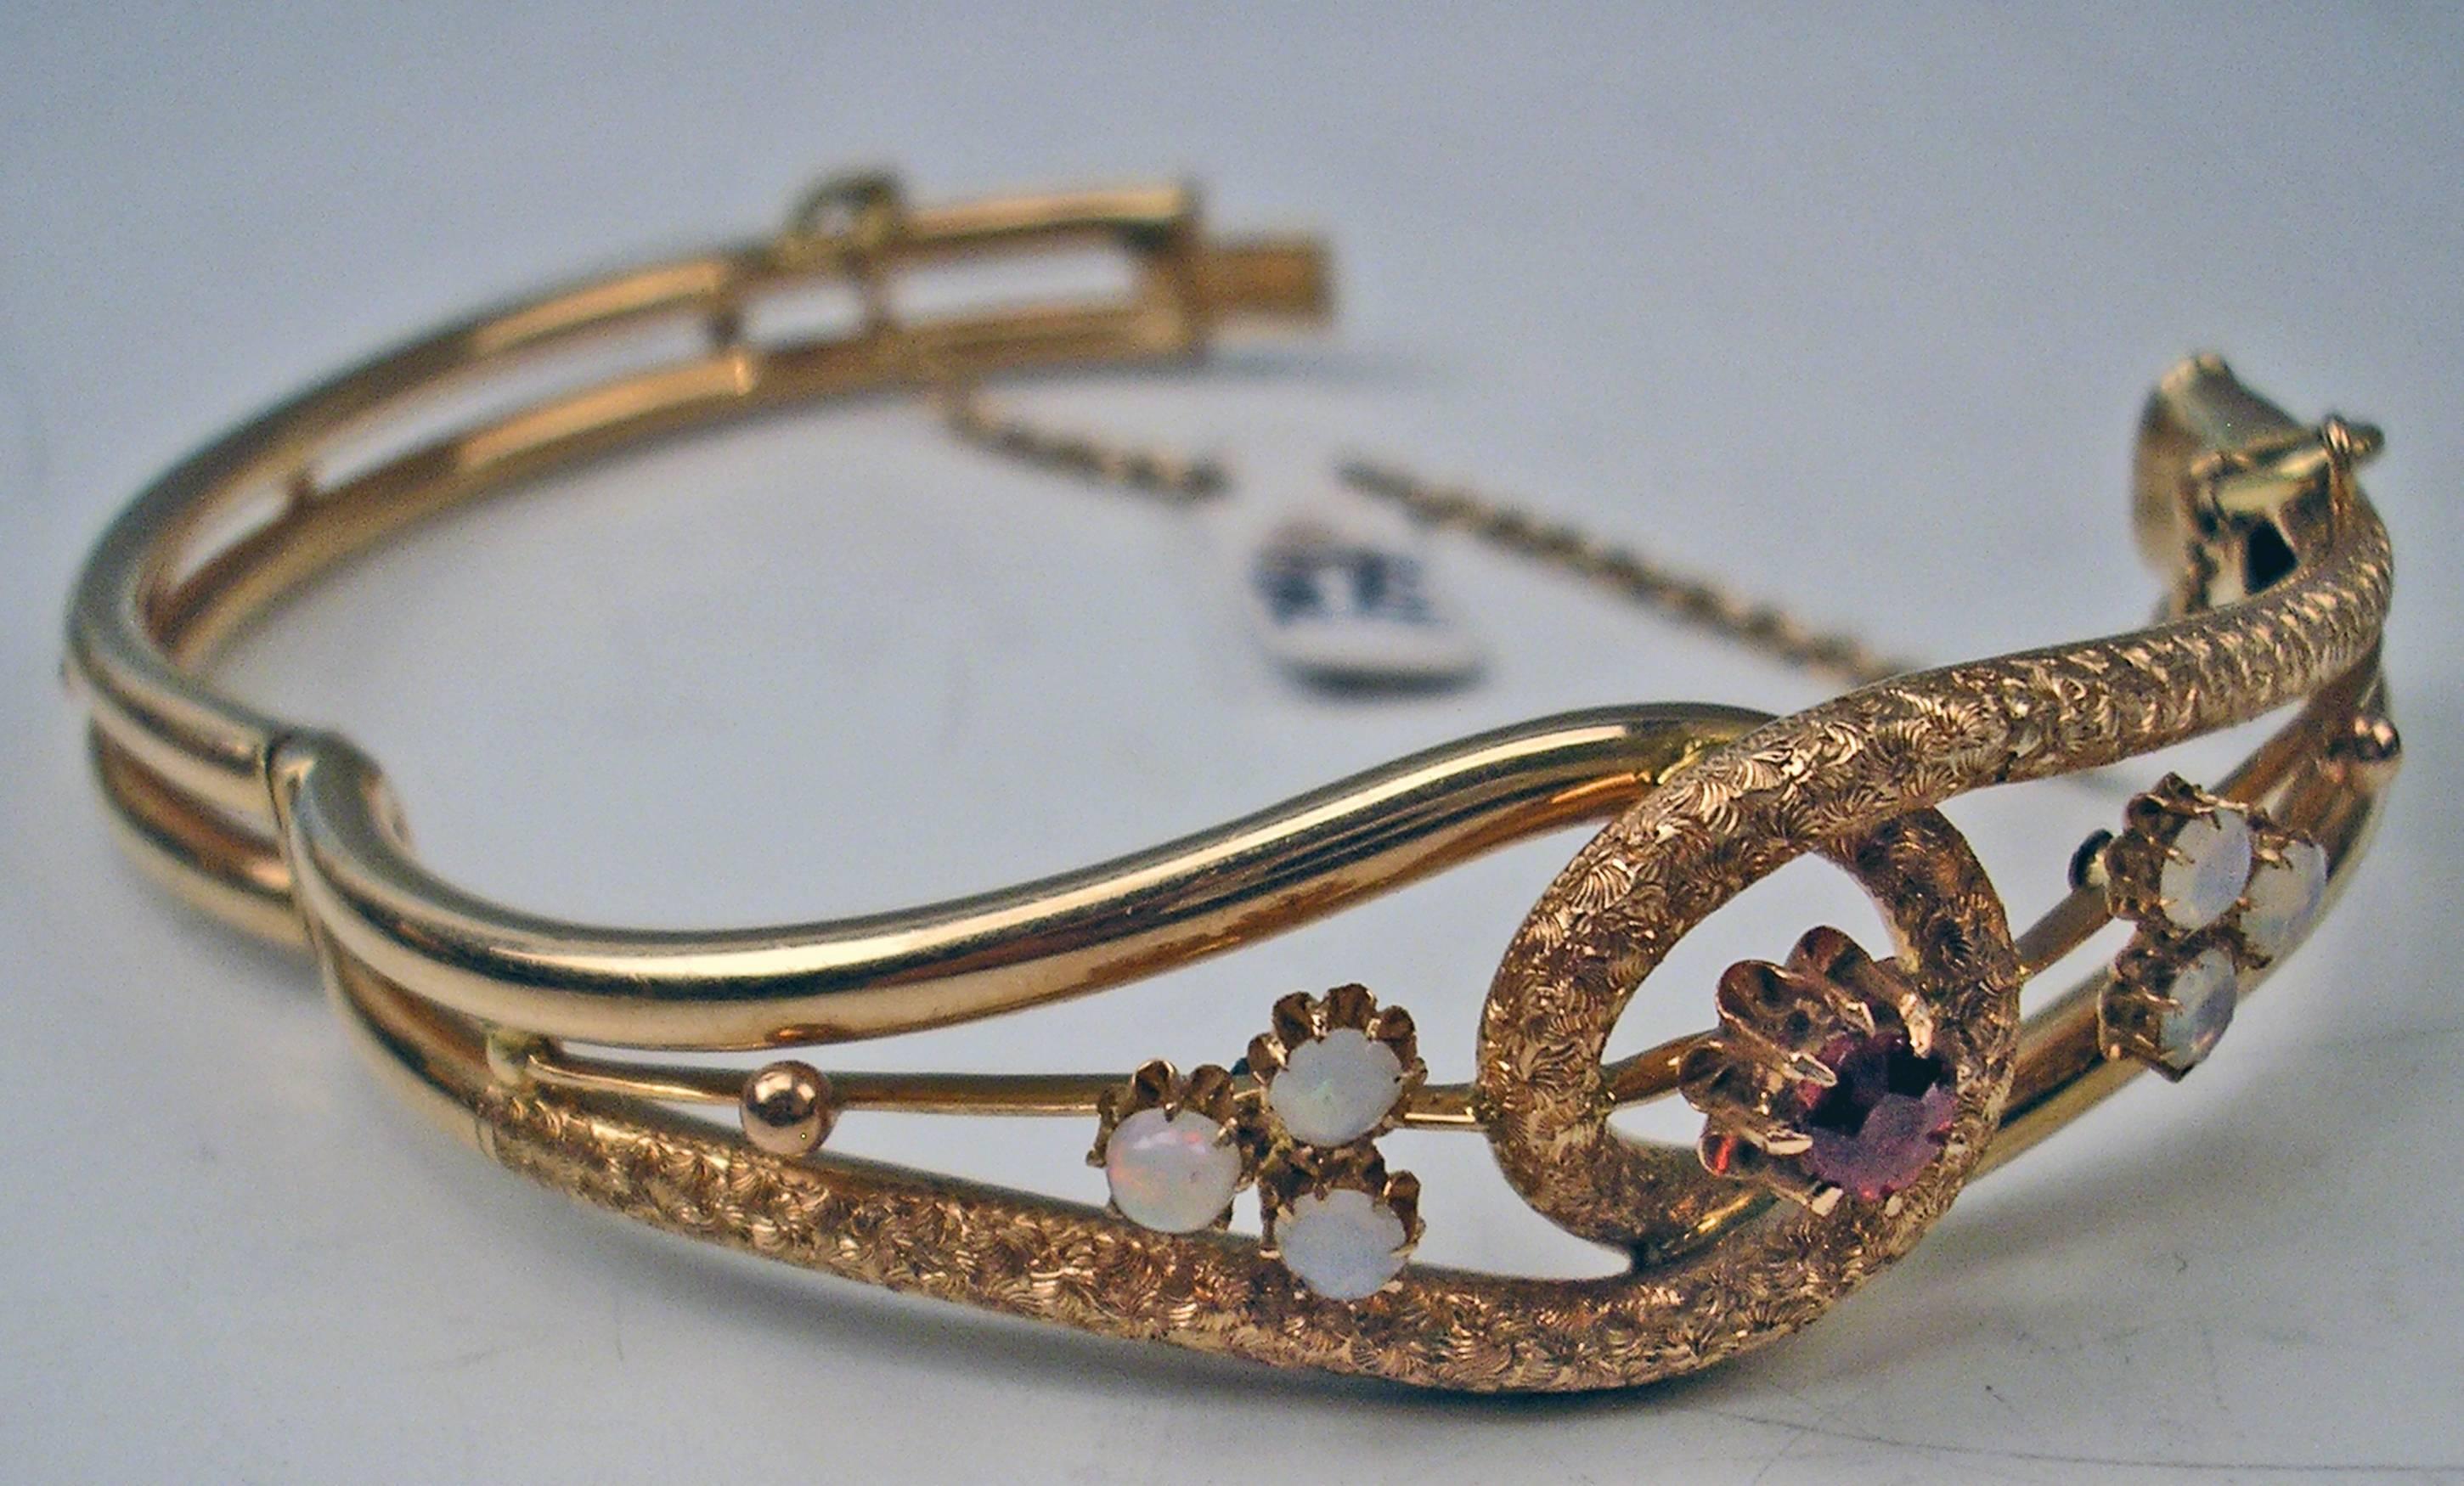 Most elegant ART NOUVEAU golden bangle with SIX OPALS as well as ONE ALMANDINE attached to middle part. Secure chain at closure existing.

GOLD  (14 CARAT GOLD / 585) 

Total weight:  13 grams     0.458 oz

Hallmarked:
Austrian Official Punch